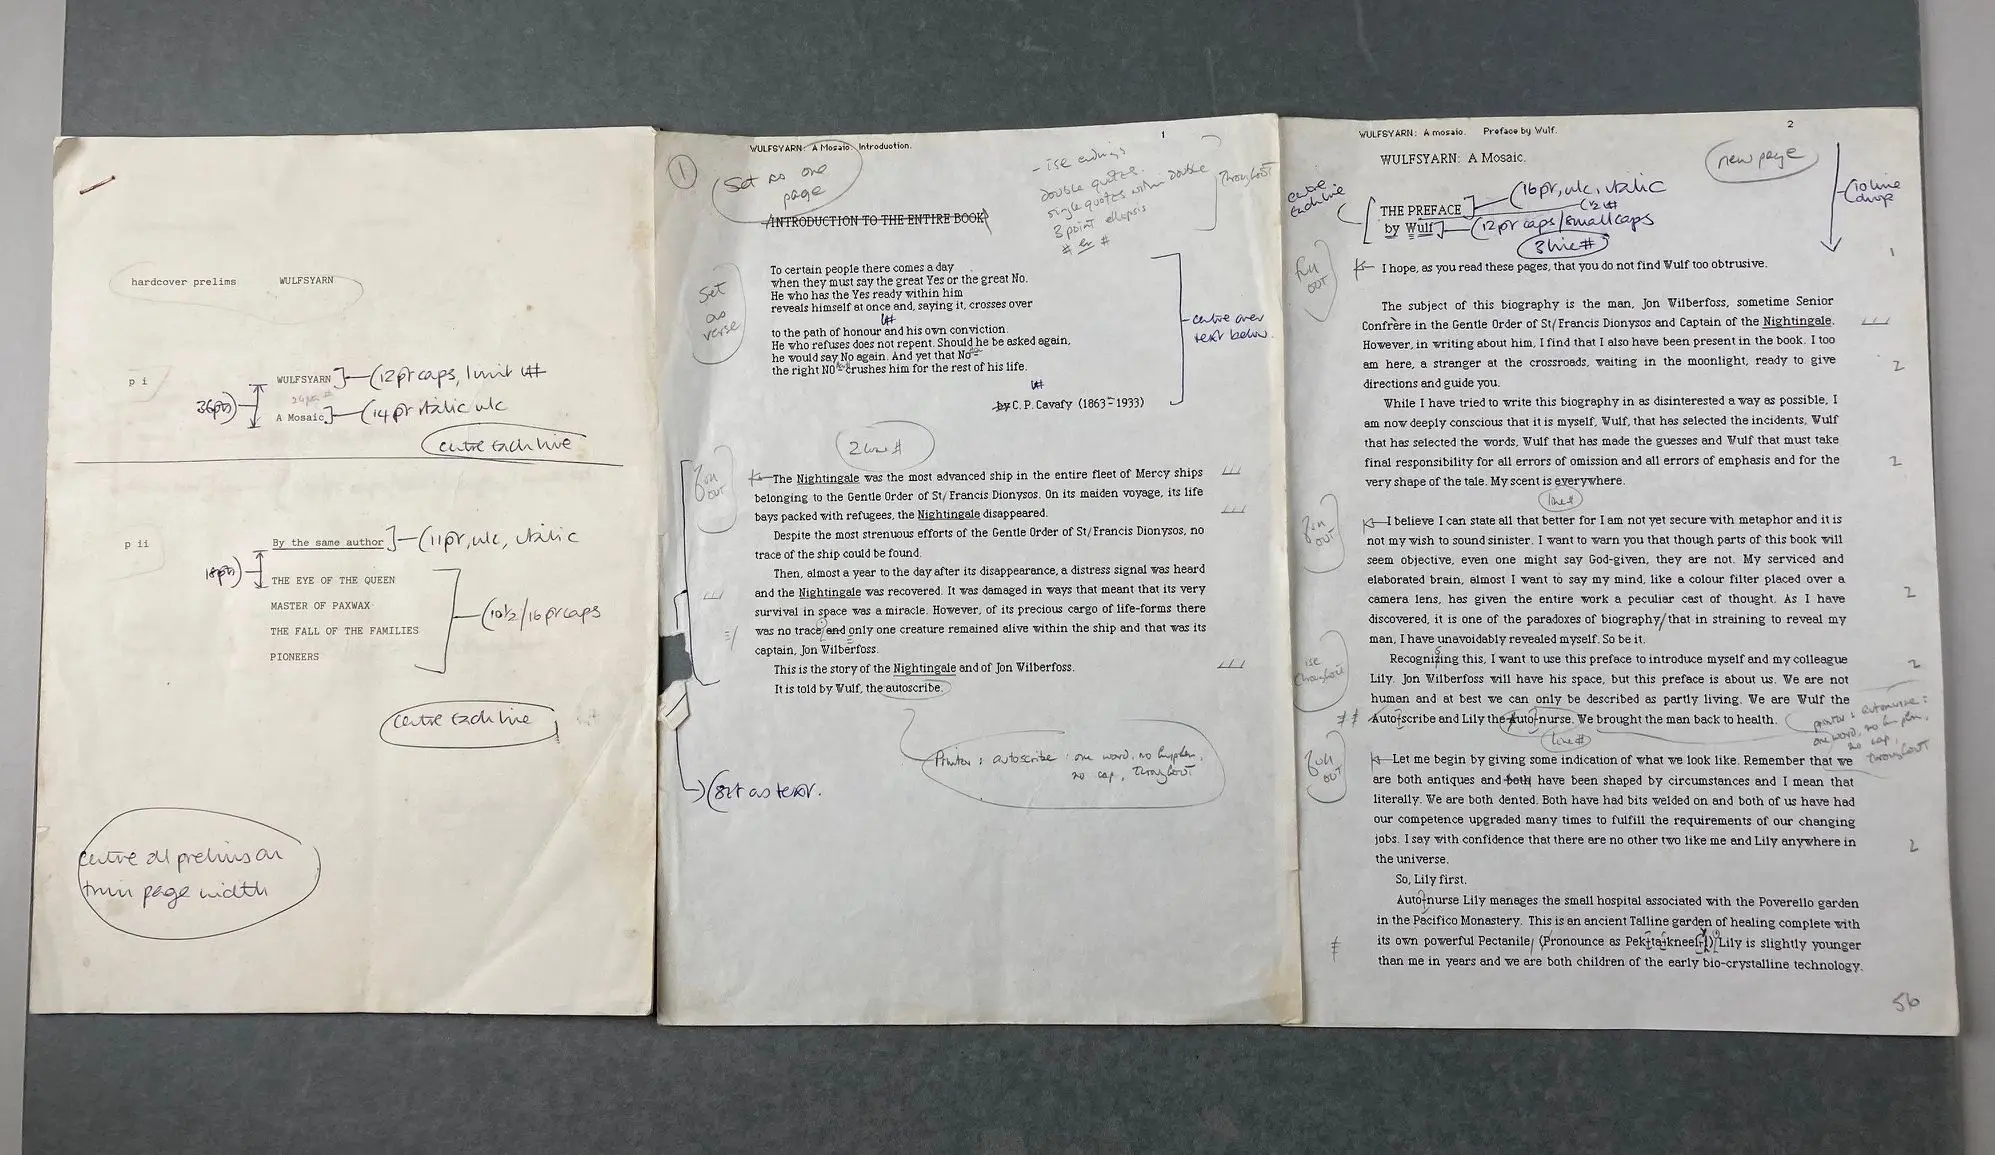 Three typed pages with handwritten notes in the margins and between lines. 